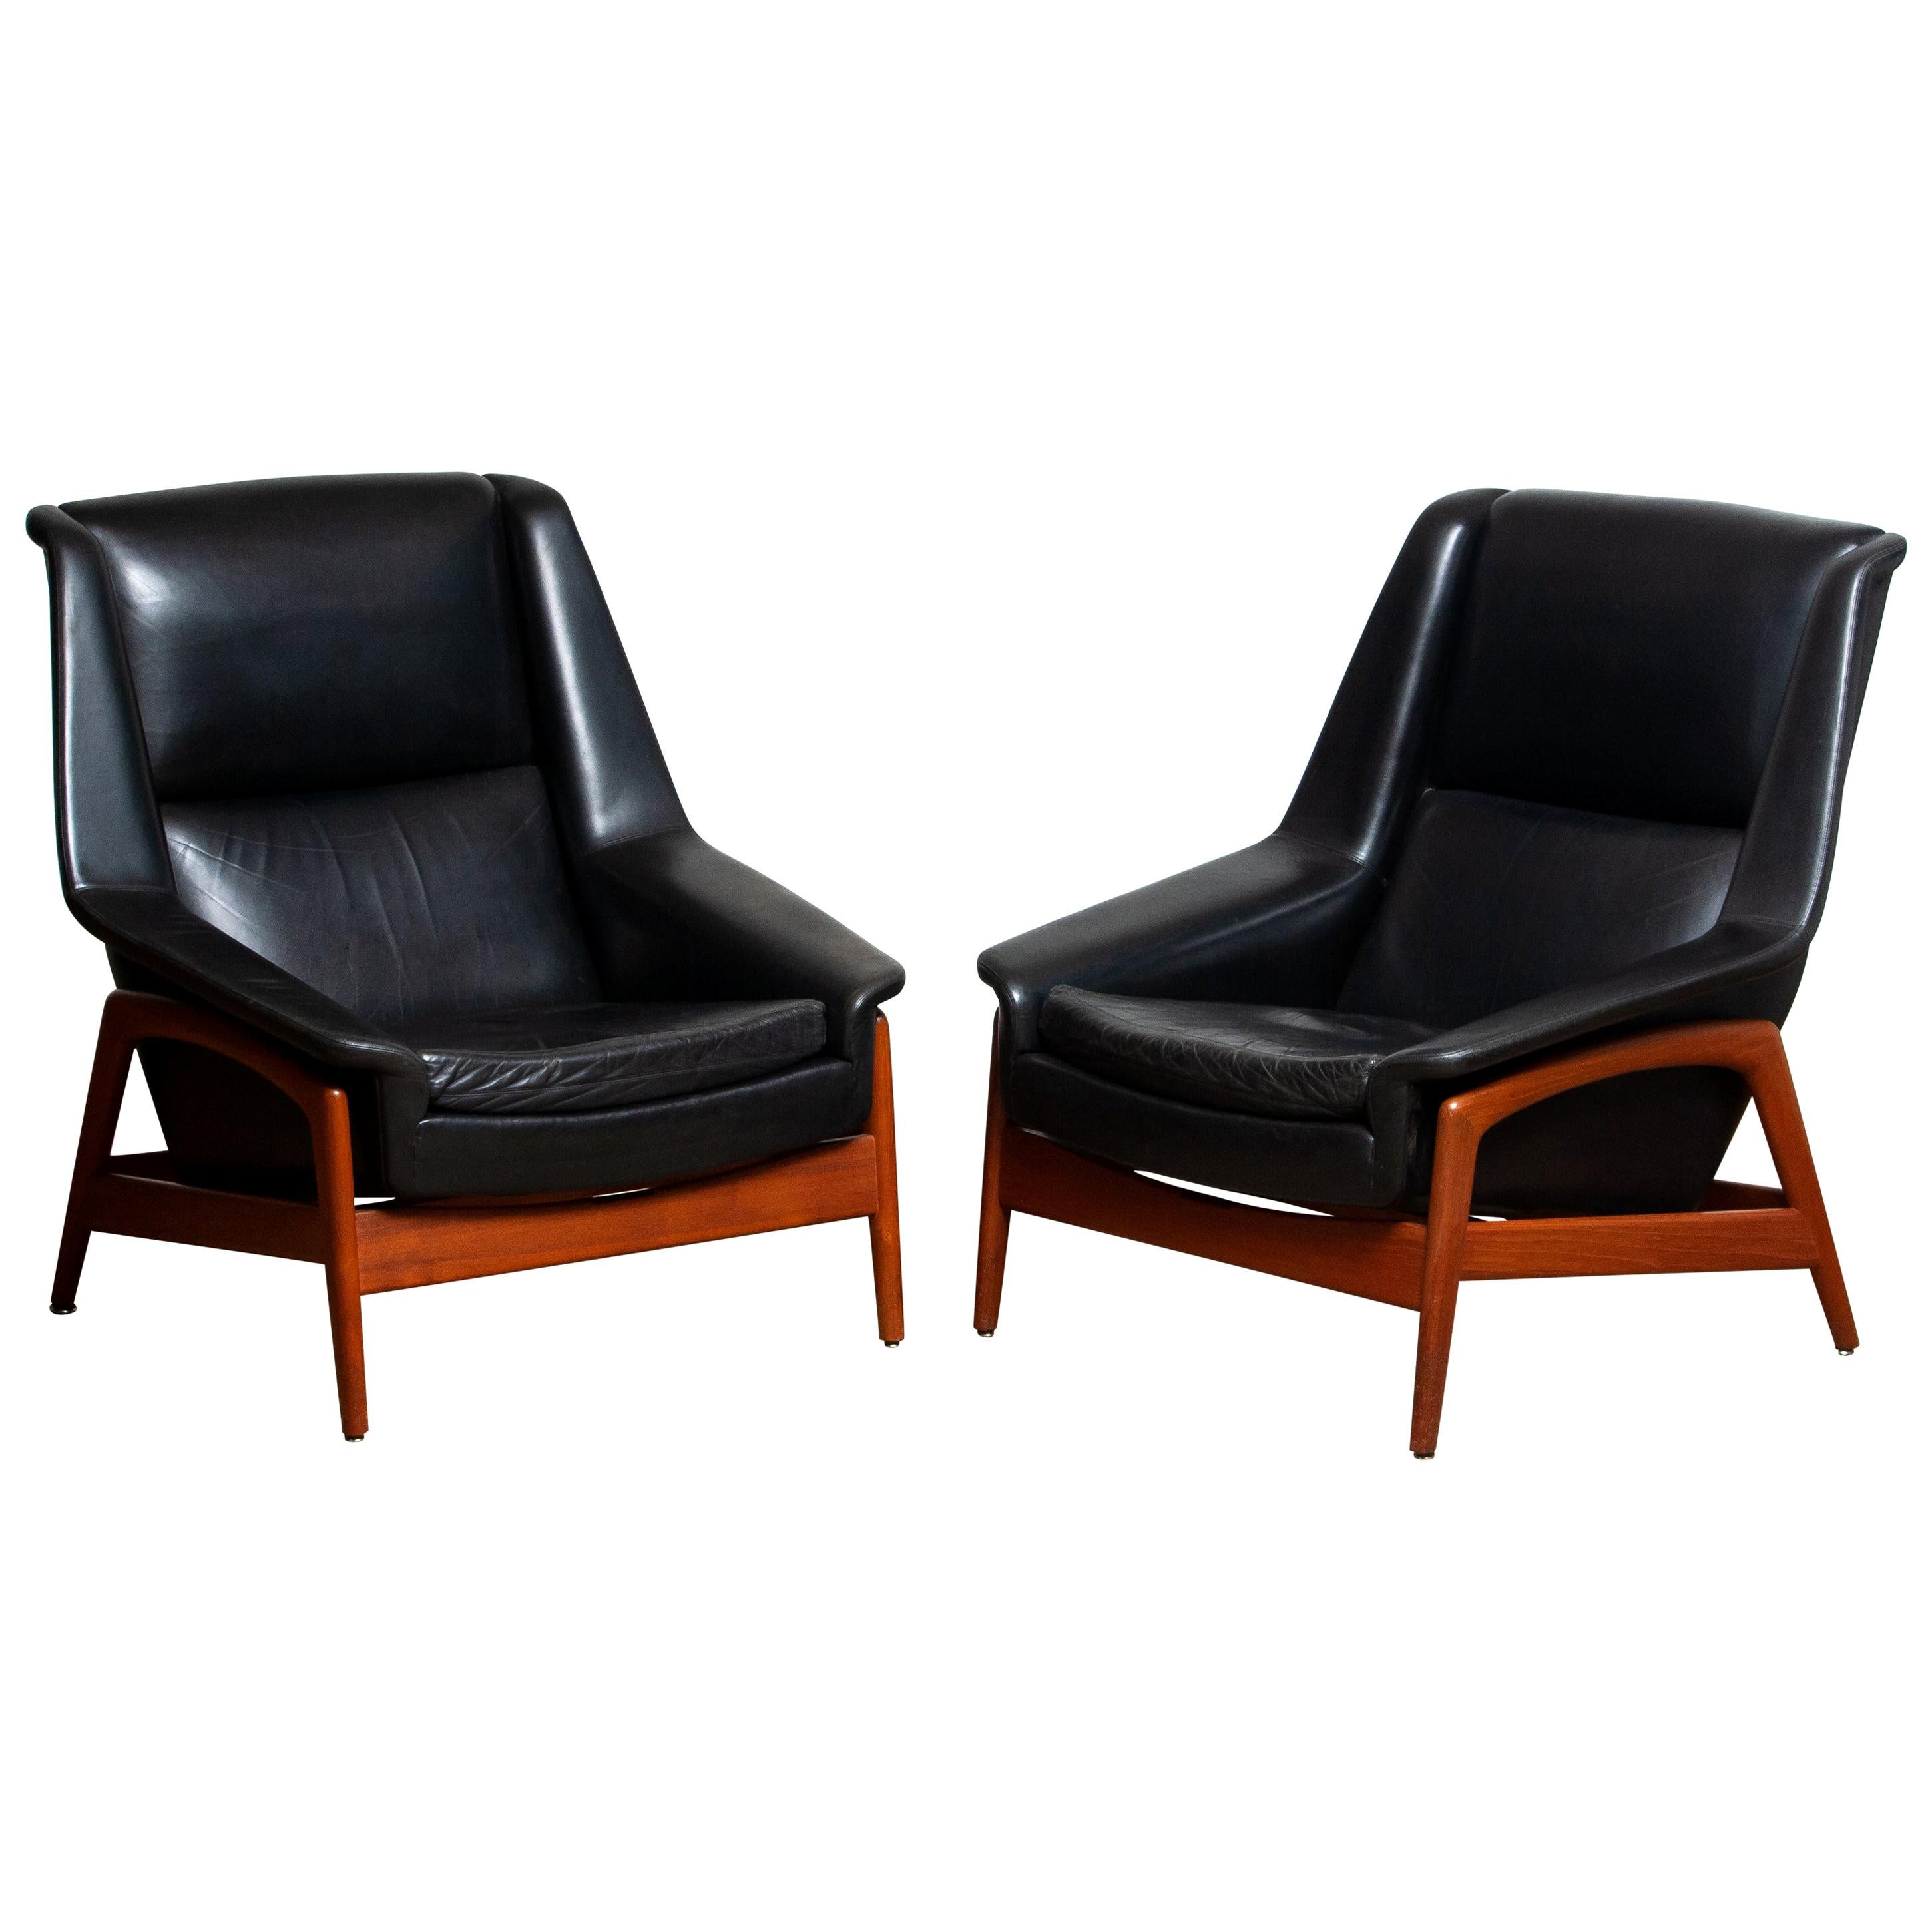 1960s, Pair of Lounge Chairs 'Profil', Folke Ohlsson for DUX in Leather and Teak